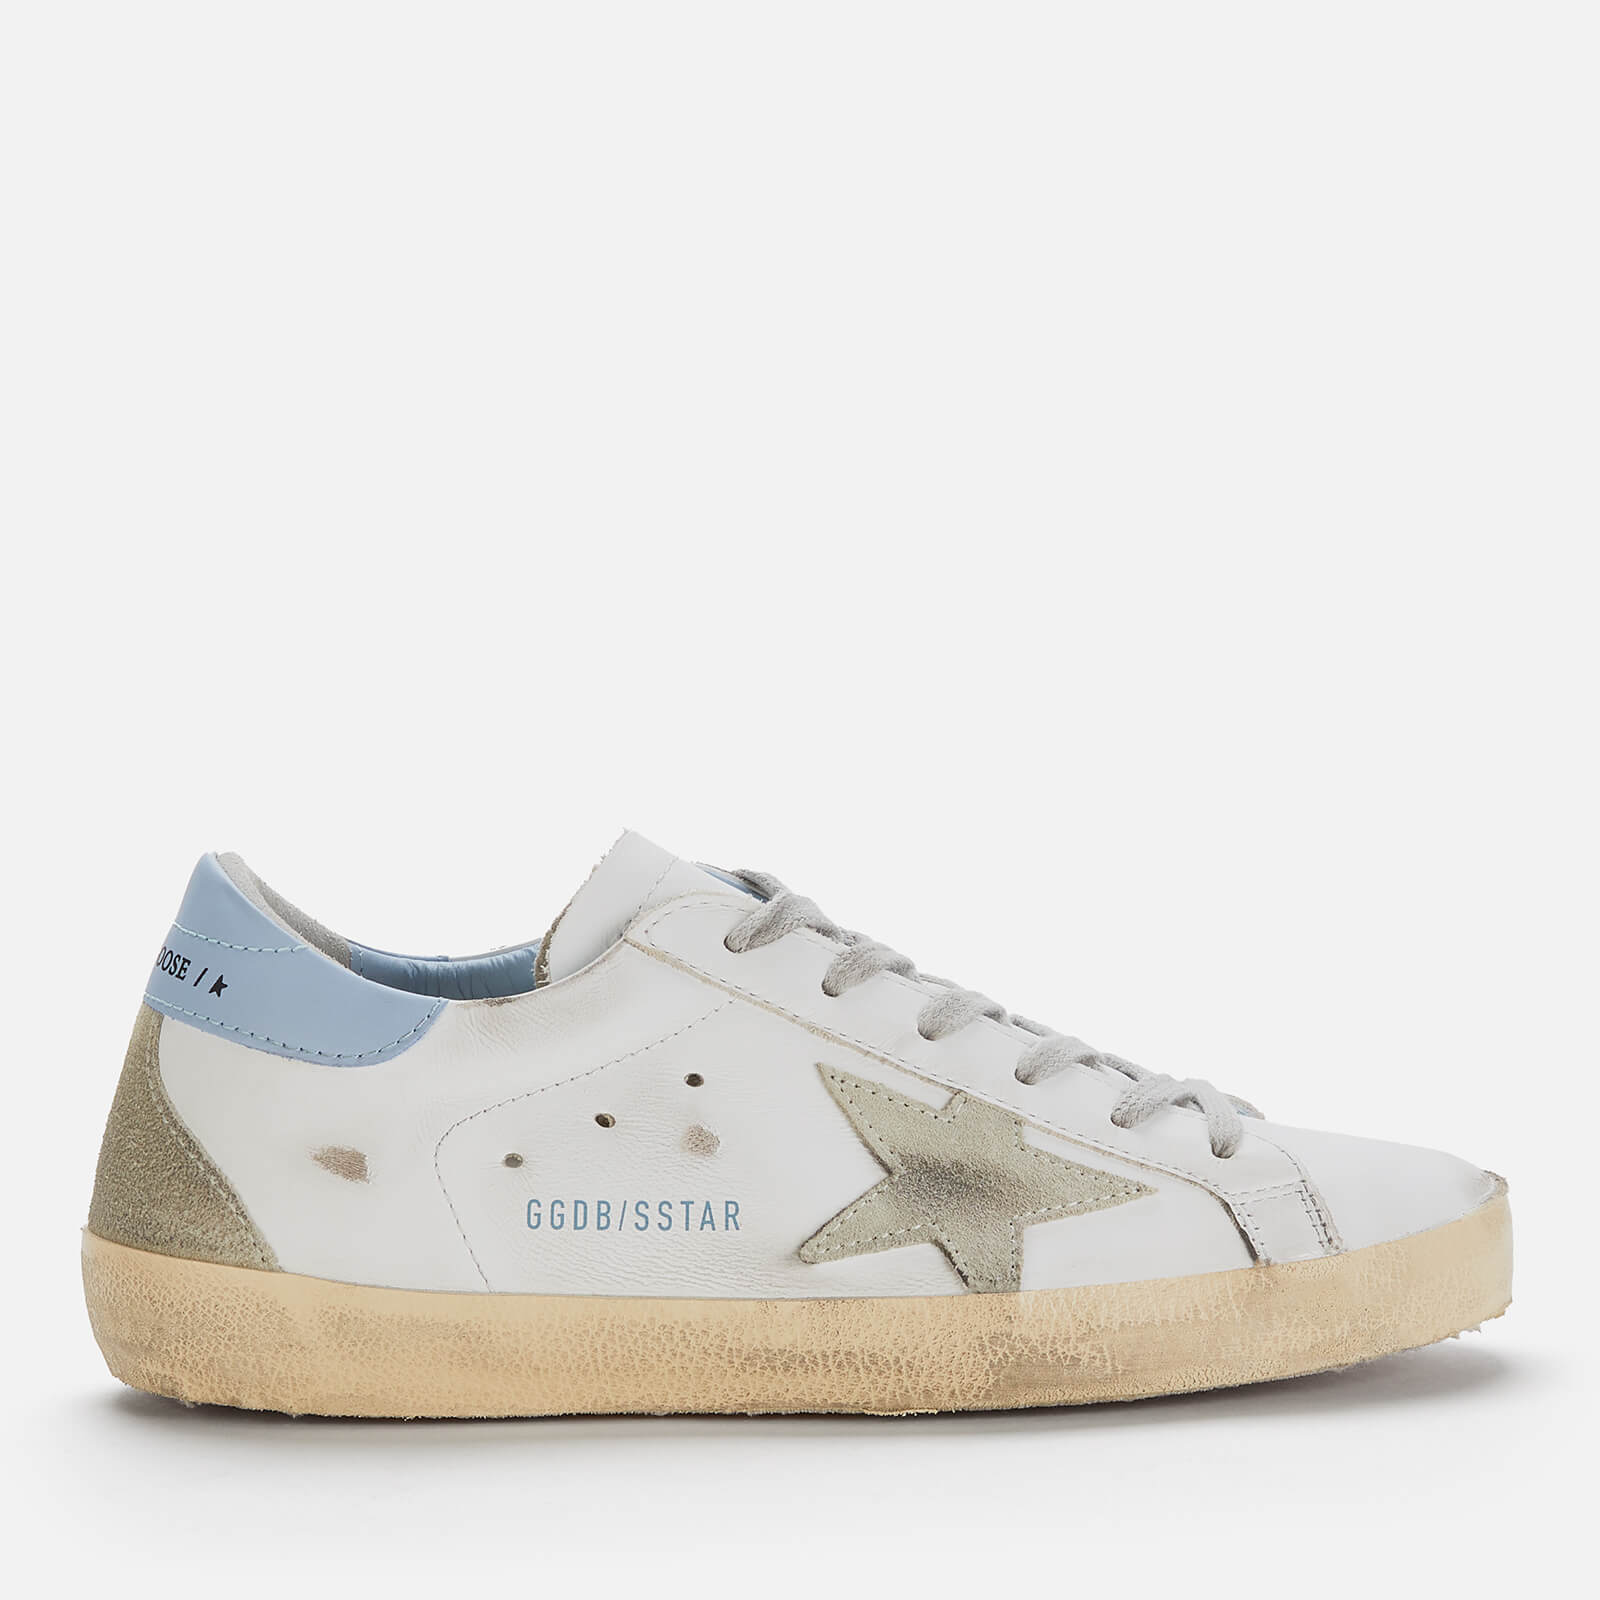 Golden Goose Women's Superstar Leather Trainers - White/Ice/Powder Blue - UK 3